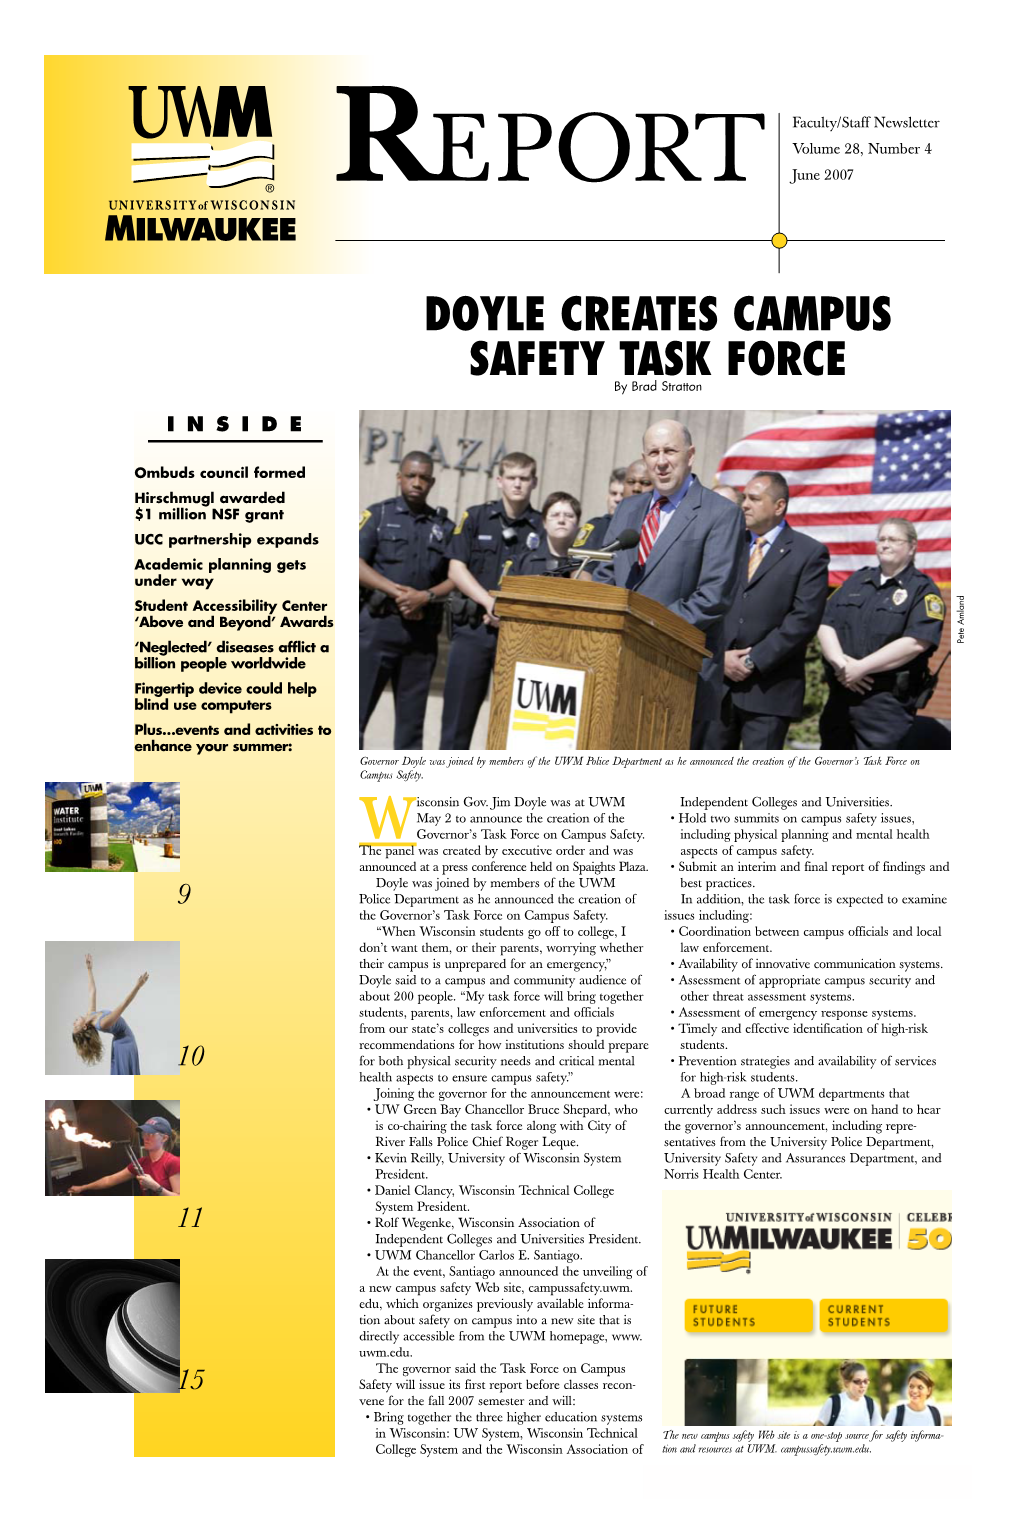 Doyle Creates Campus Safety Task Force by Brad Stratton